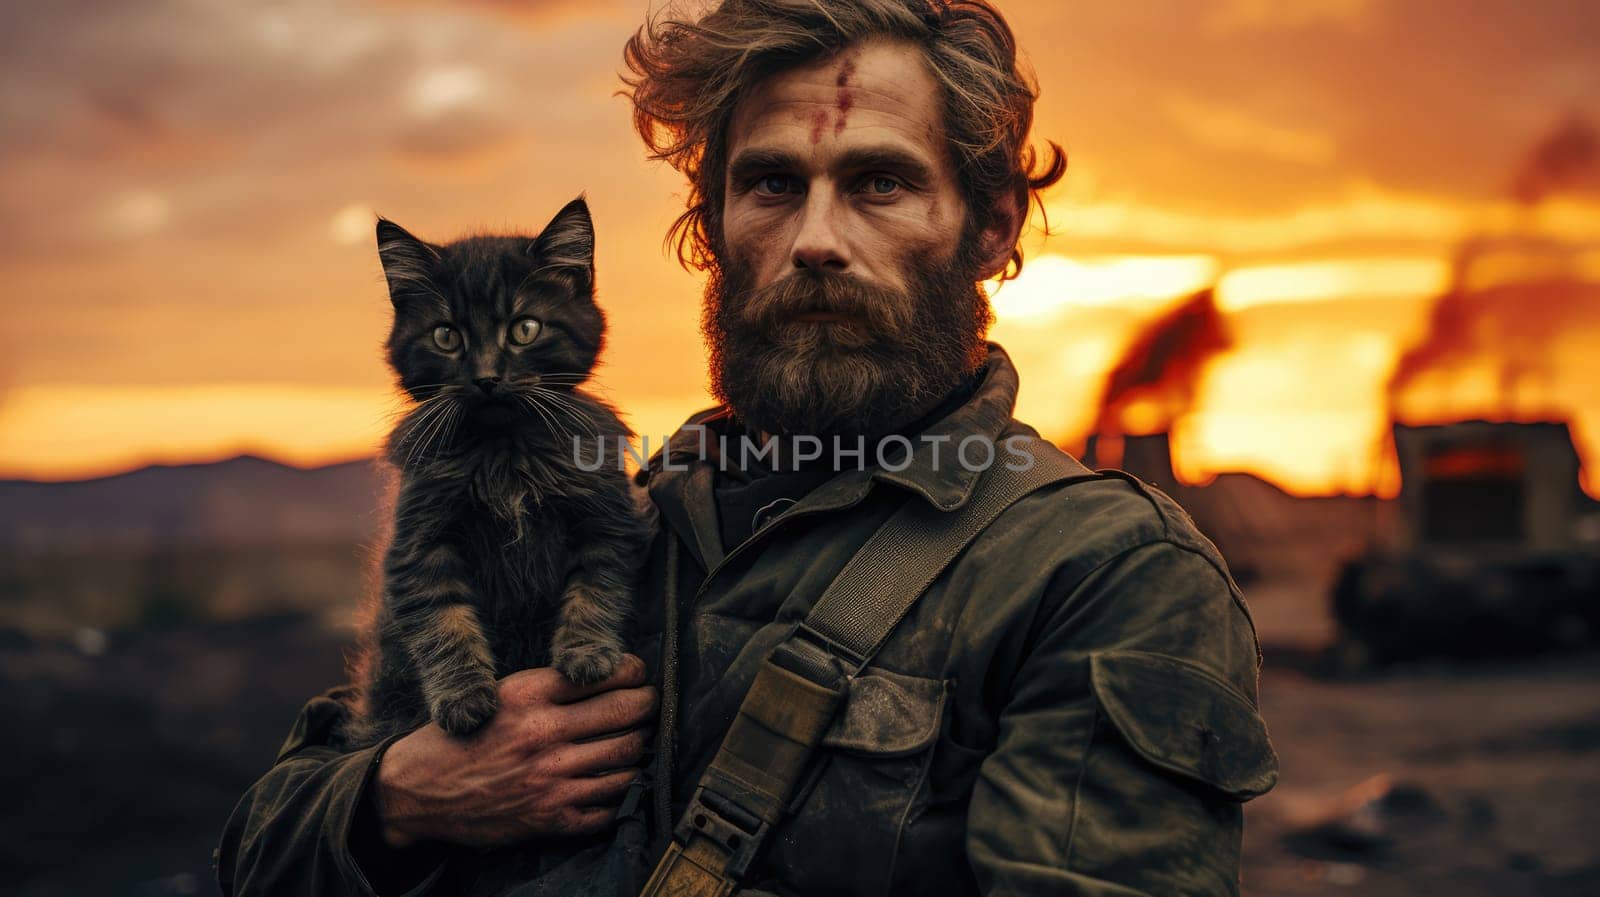 Portrait of a military man holding a kitten by palinchak